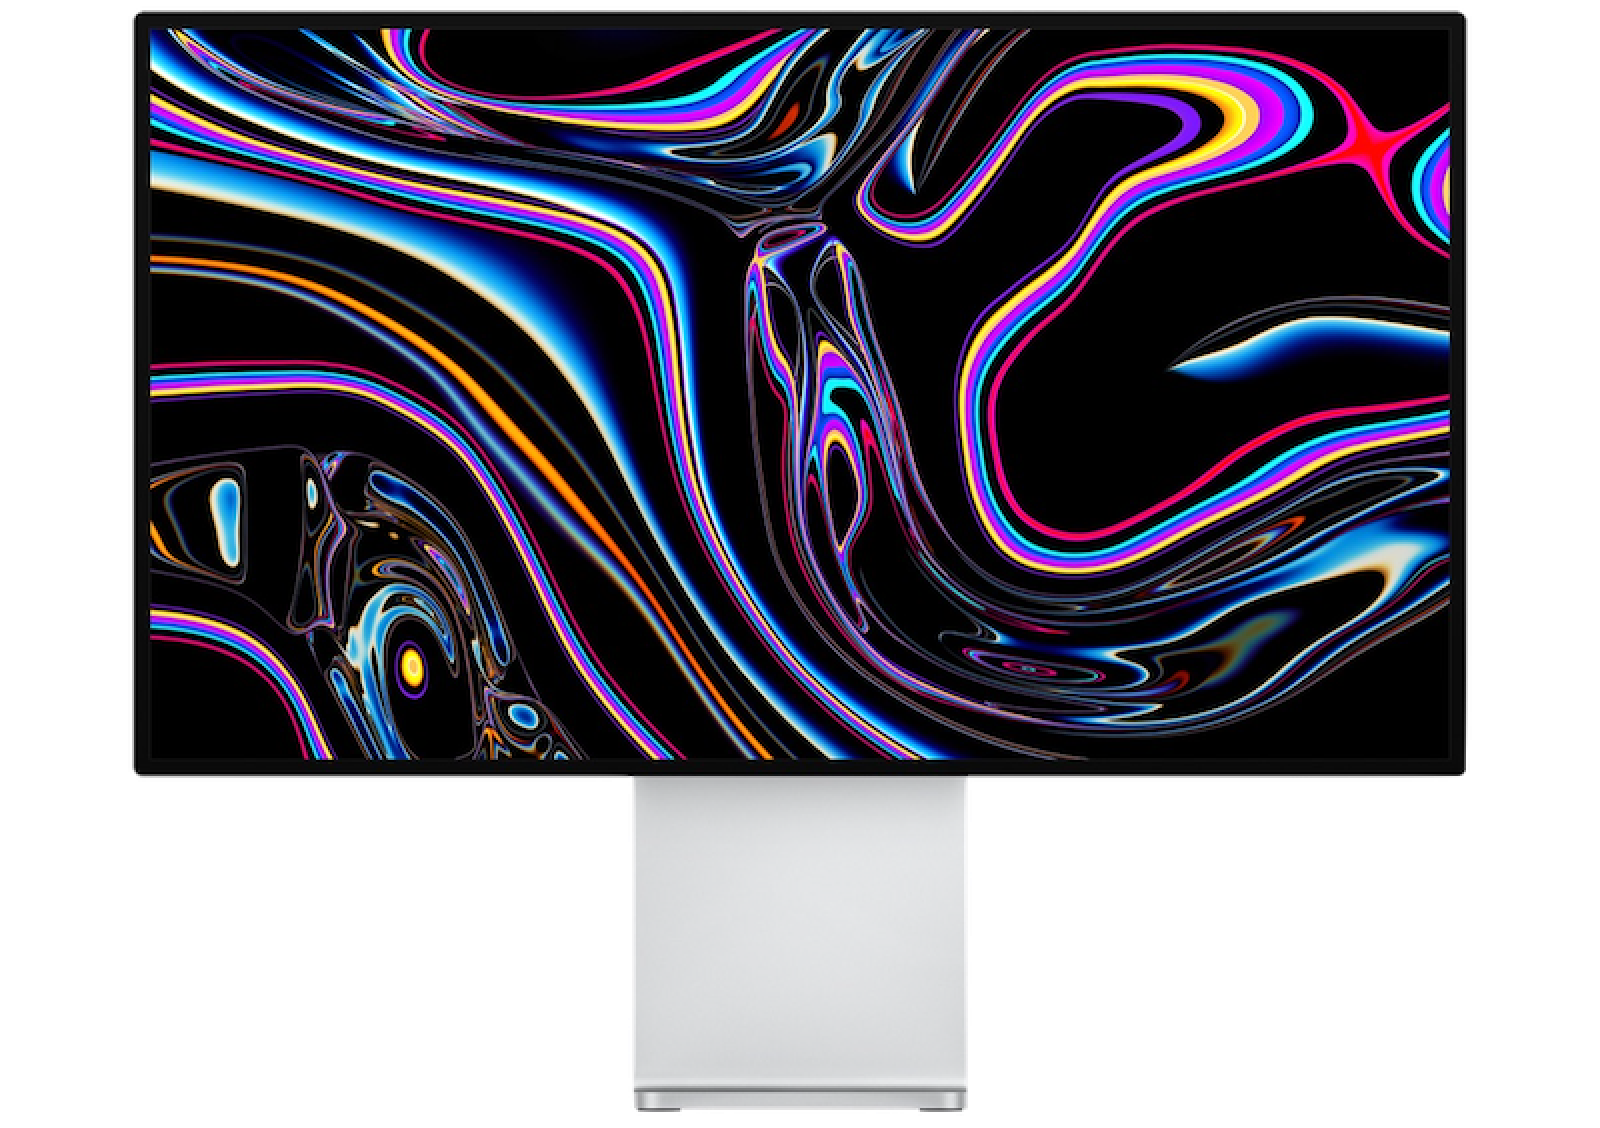 apple_pro_display_xdr_roundup_header-800x564.png